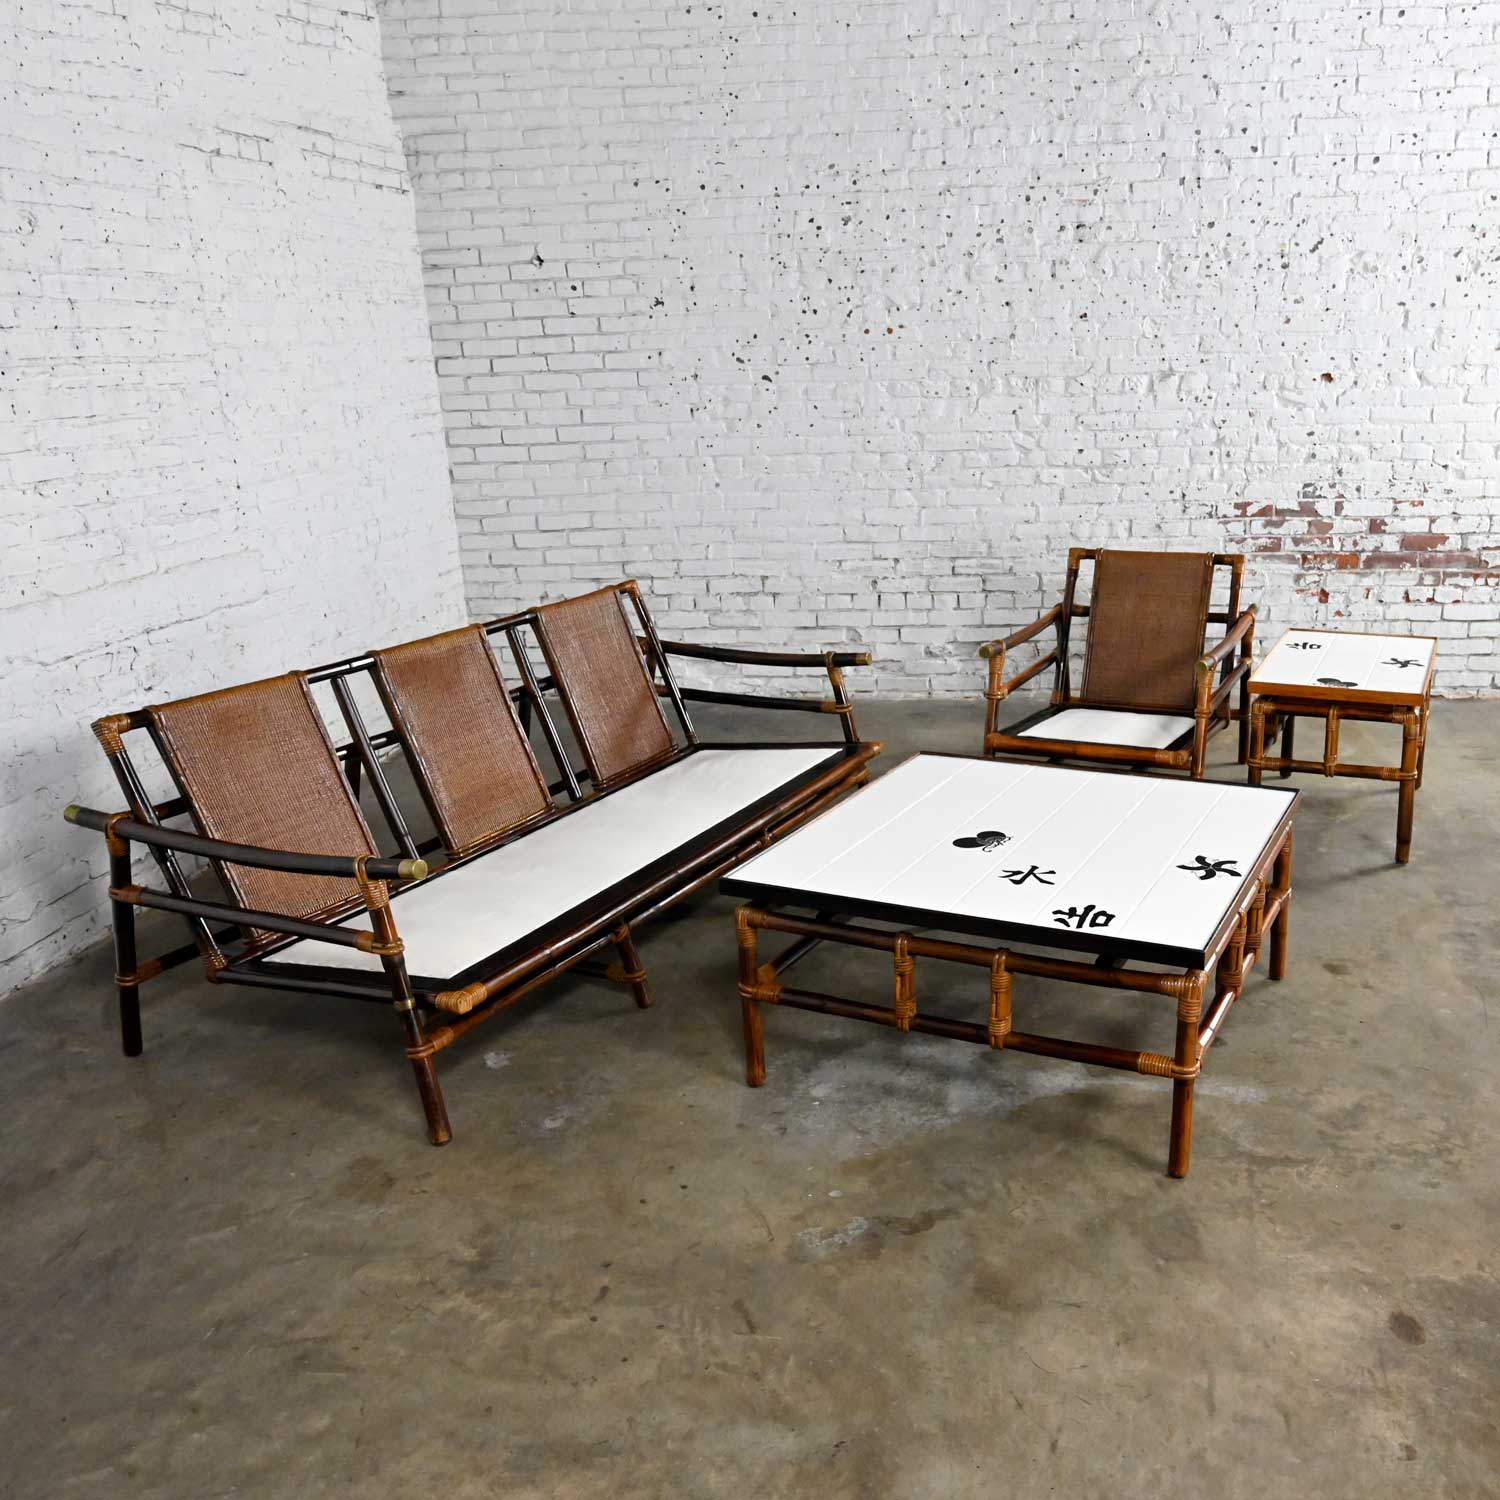 4 Piece Set Vintage Rattan Campaign Style Ficks Reed Far Horizons Collection Lounge Chair Sofa Coffee & End Table by John Wisner